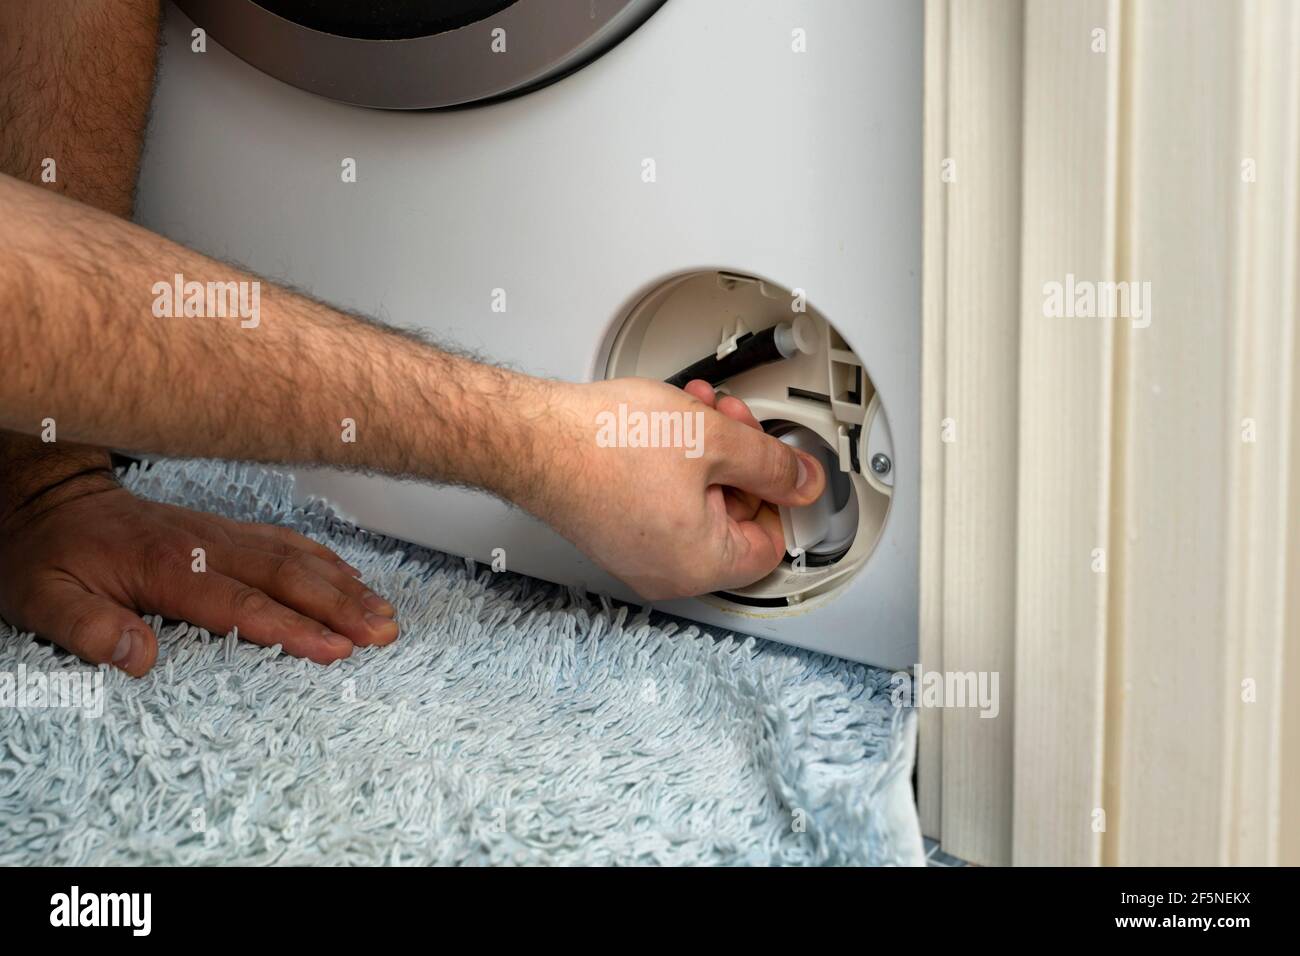 the master opens the filter of the washing machine to remove the blockage. Problem with Laundry. Stock Photo